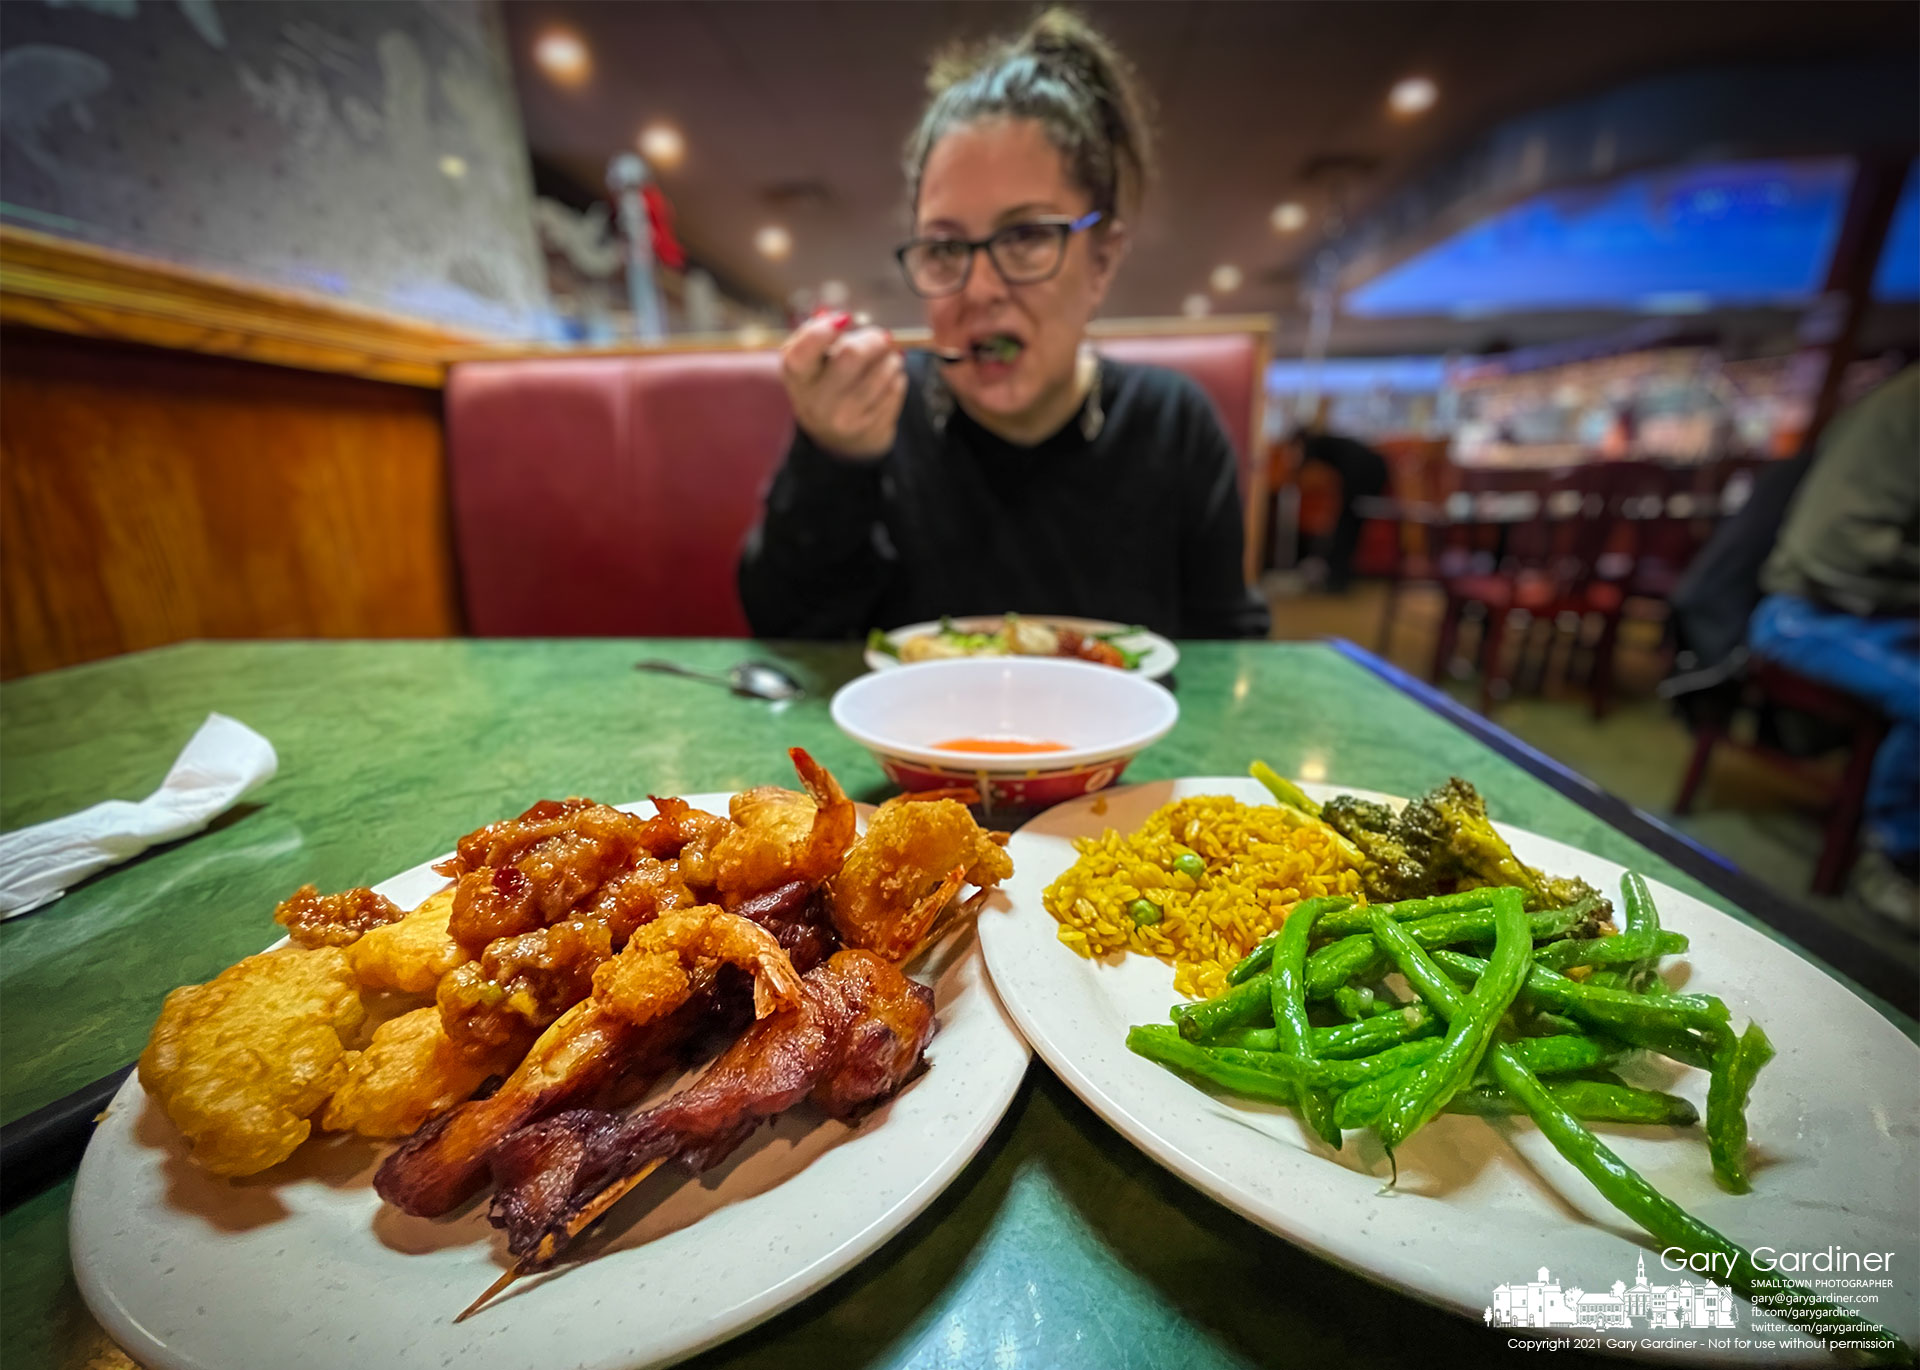 A woman sits down to a Chinese buffet meal for her Christmas dinner helping to somewhat solve the problem of her family not all being in the same place for Christmas. My Final Photo for Dec. 25, 2021.